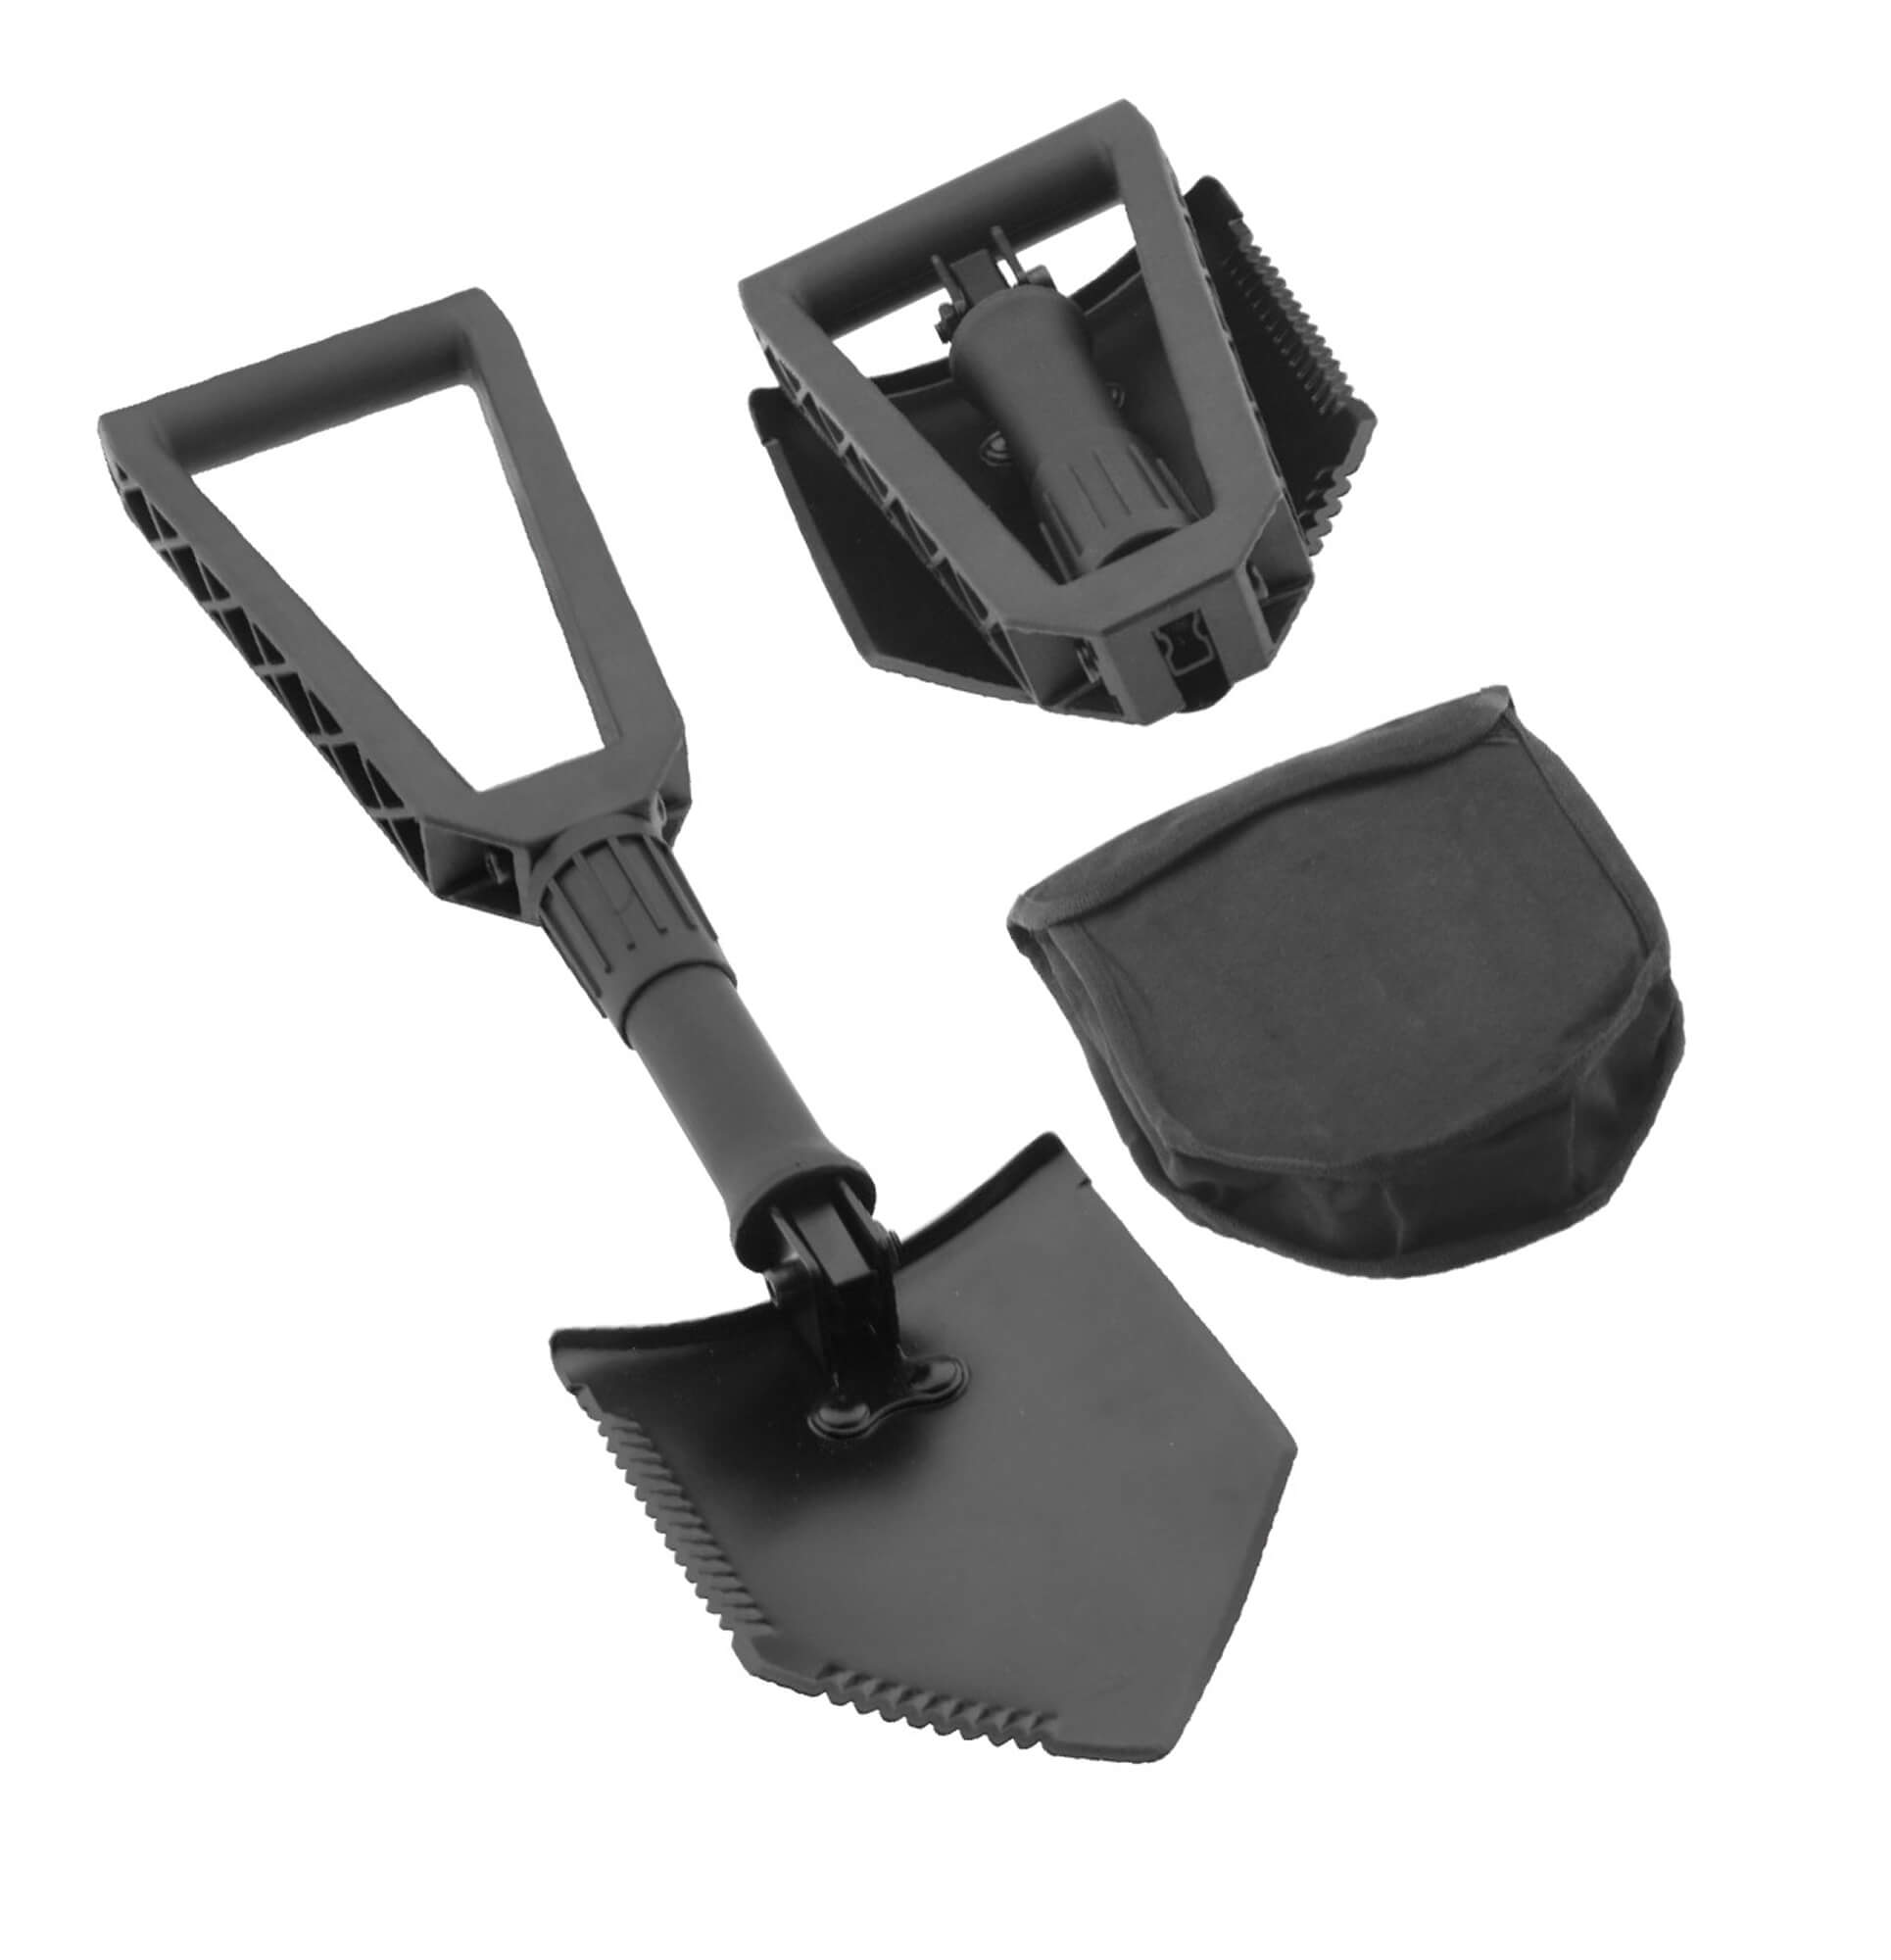 Smittybilt’s Recovery Utility Tool (RUT) is a fully functional collapsible military-style shovel. This modern rendition of the “e-tool” has an easy grip and light handle with a carbon steel blade that is heat treated and features double serrated edges for easy digging or cutting. The heavy-duty black powder coated body is 23-1/4-inches when open and folds down to a mere 9-inches when closed, allowing it to be stowed easily.